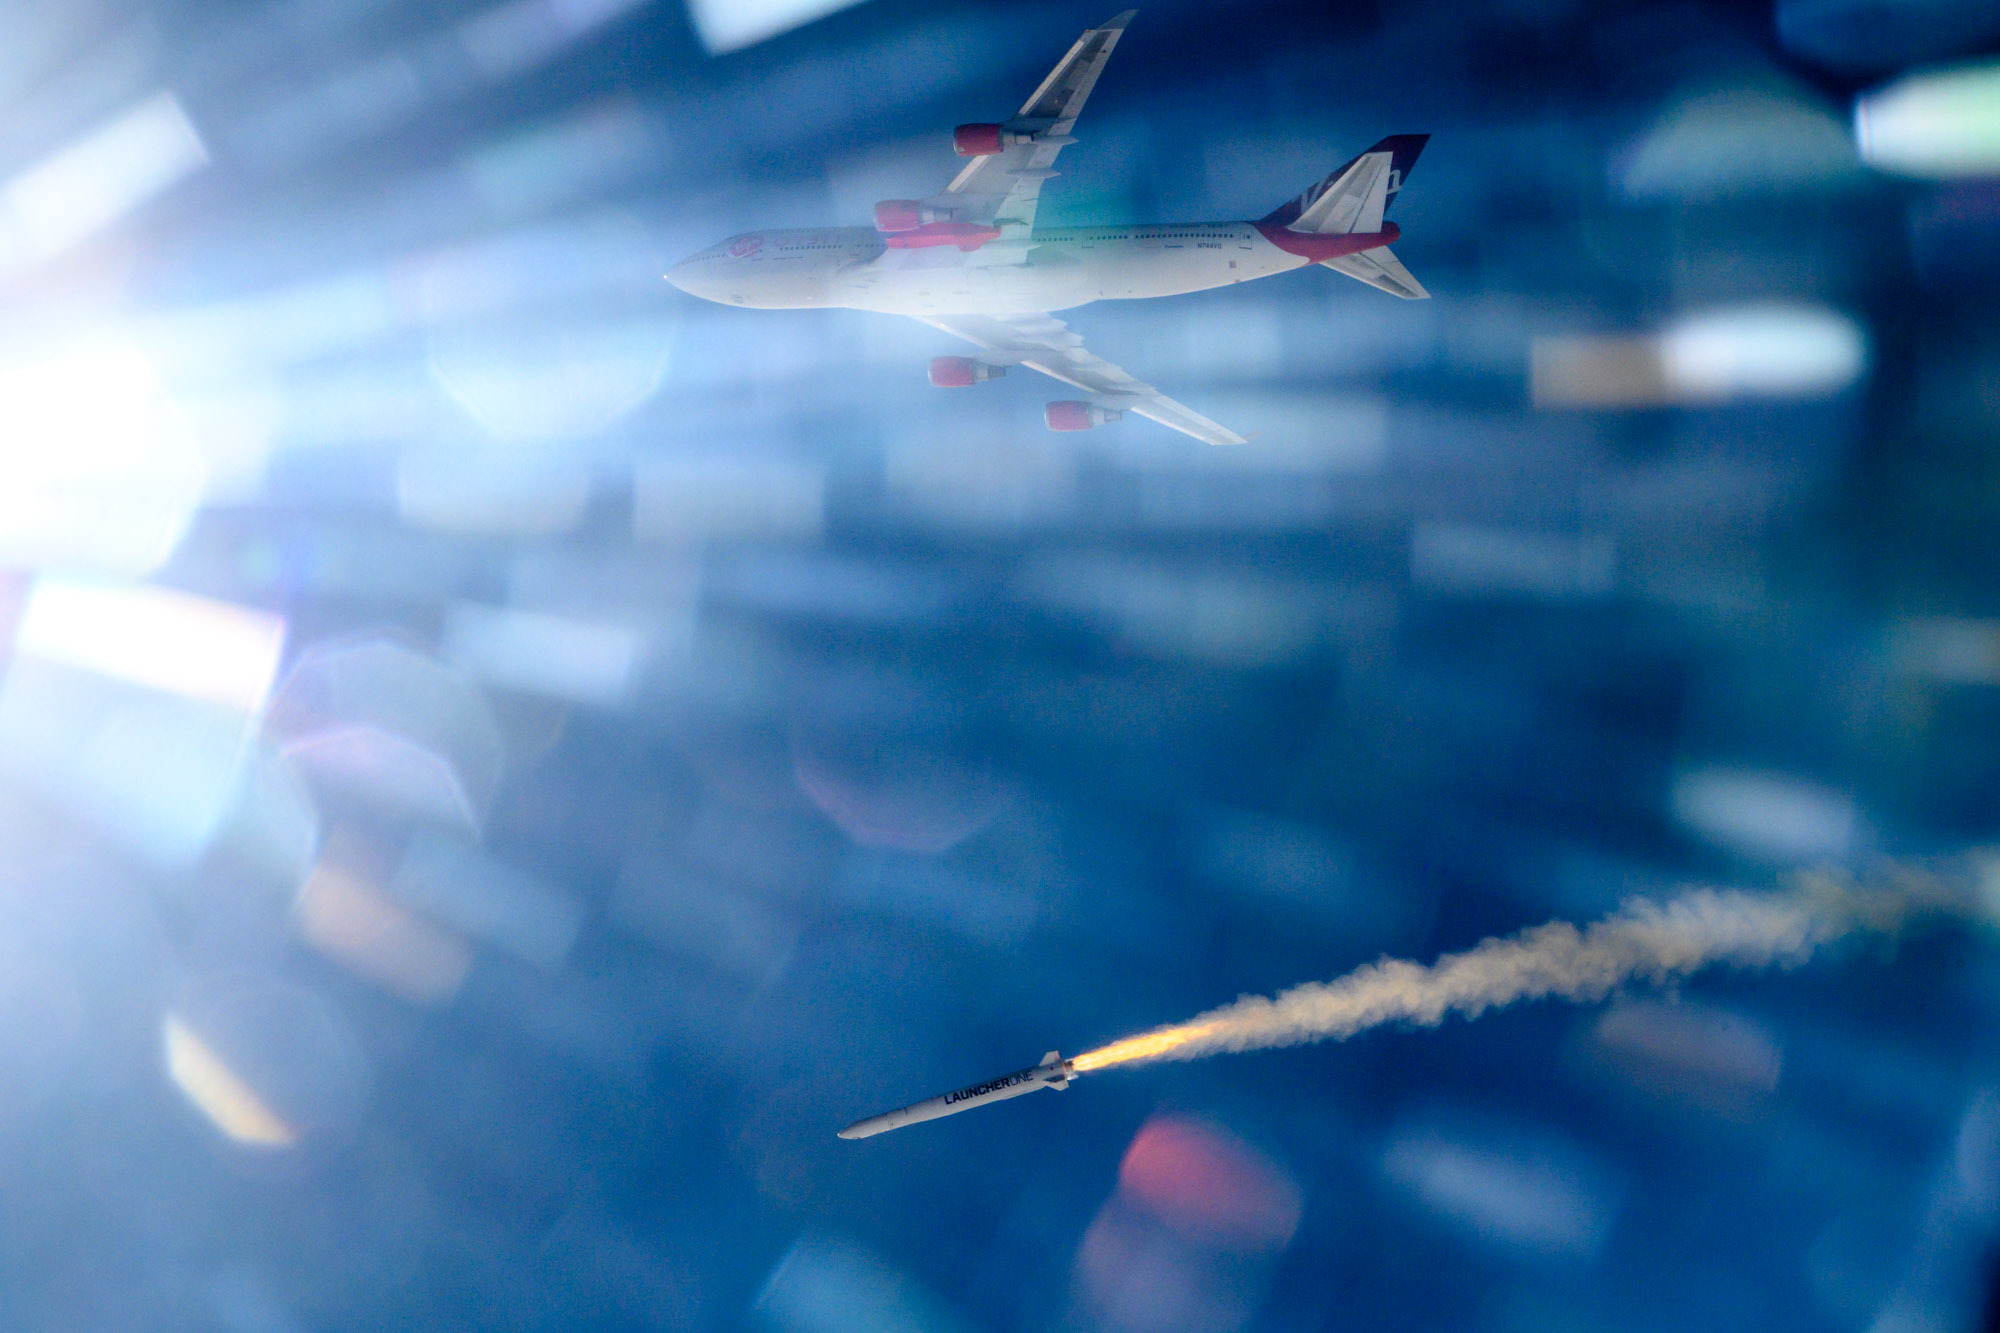 Rocket and Virgin Orbit Boeing aircraft in the sky; sunlight rays blur the view.